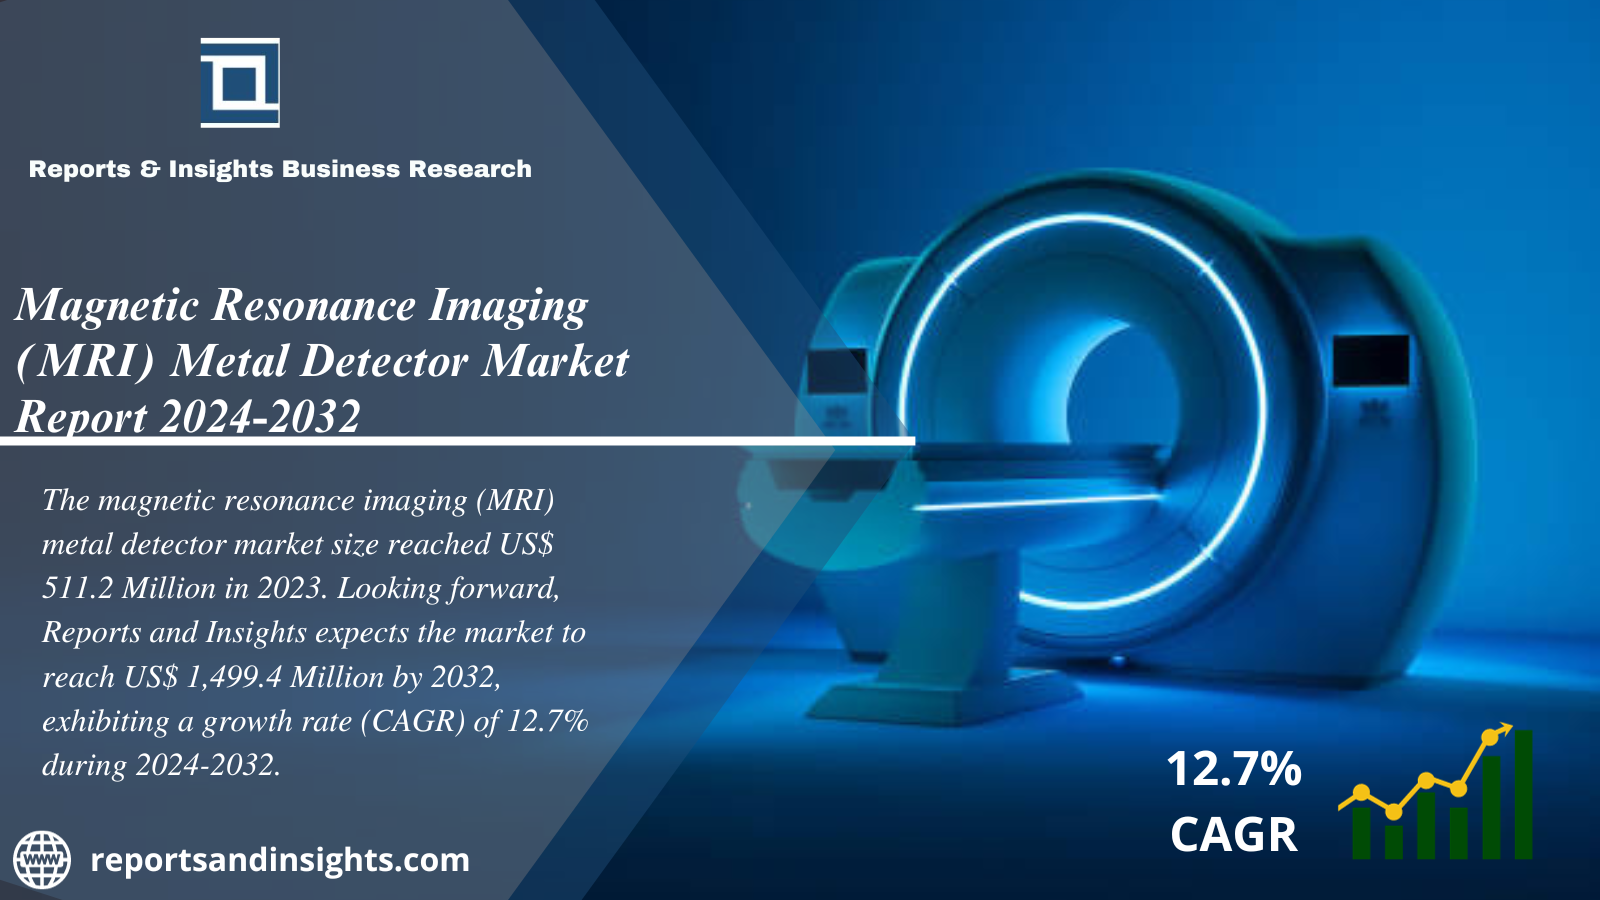 Magnetic Resonance Imaging (MRI) Metal Detector Market Report Growth, Trends, Size, Share, Research and Forecast to 2024 to 2032